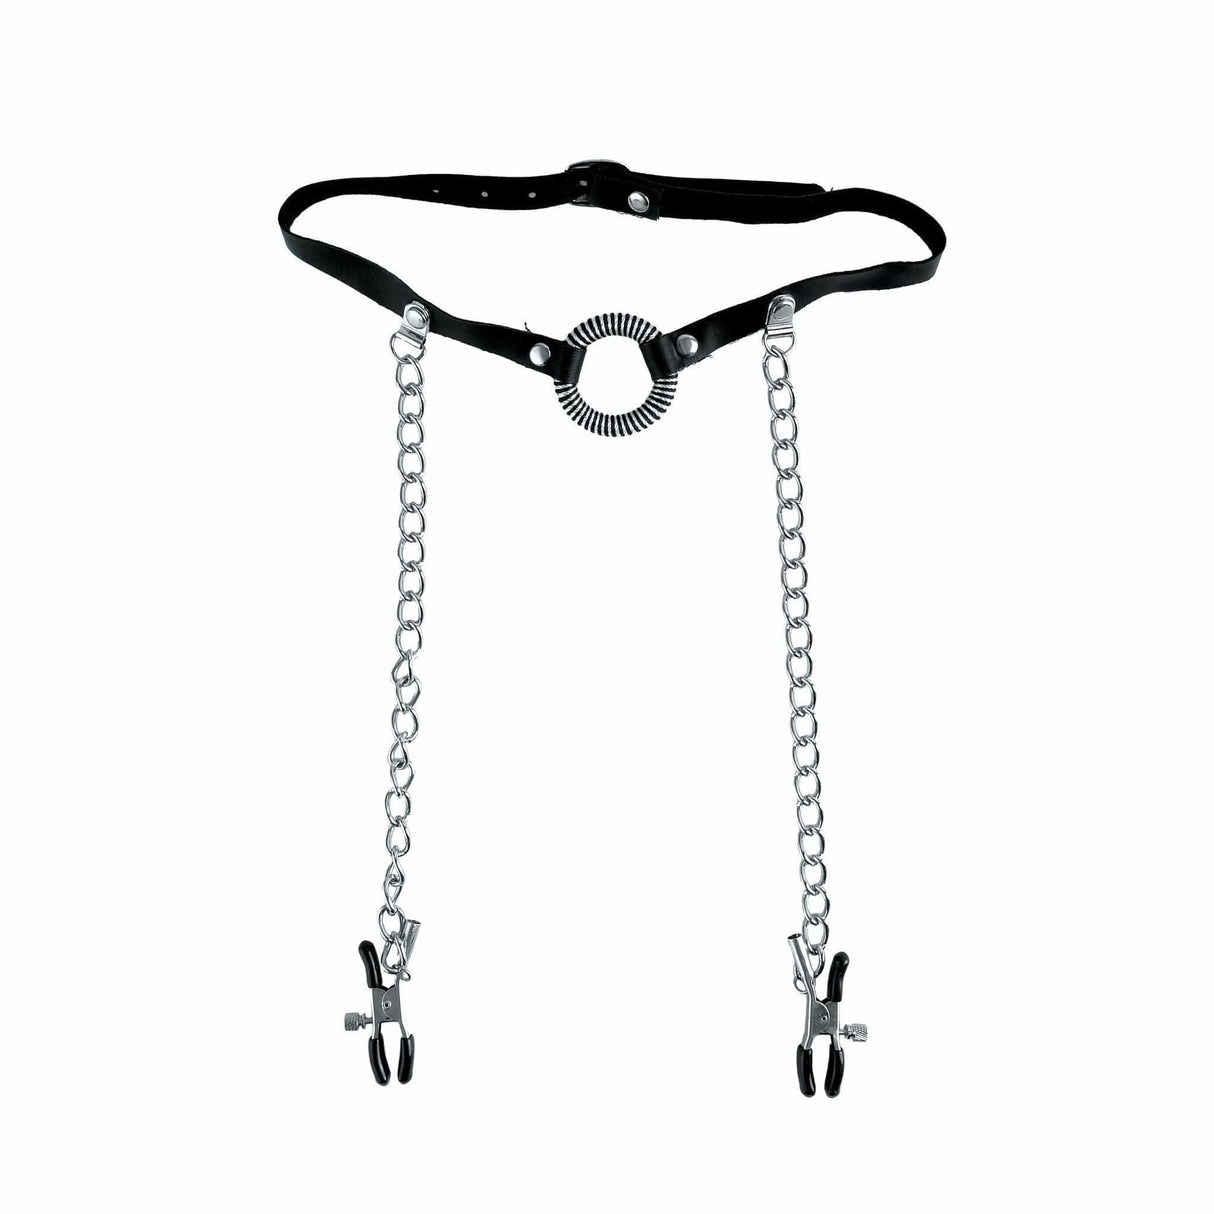 Pipedream - Fetish Fantasy Series Limited Edition O-Ring Gag & Nipple Clamps (Black) PD1480 CherryAffairs